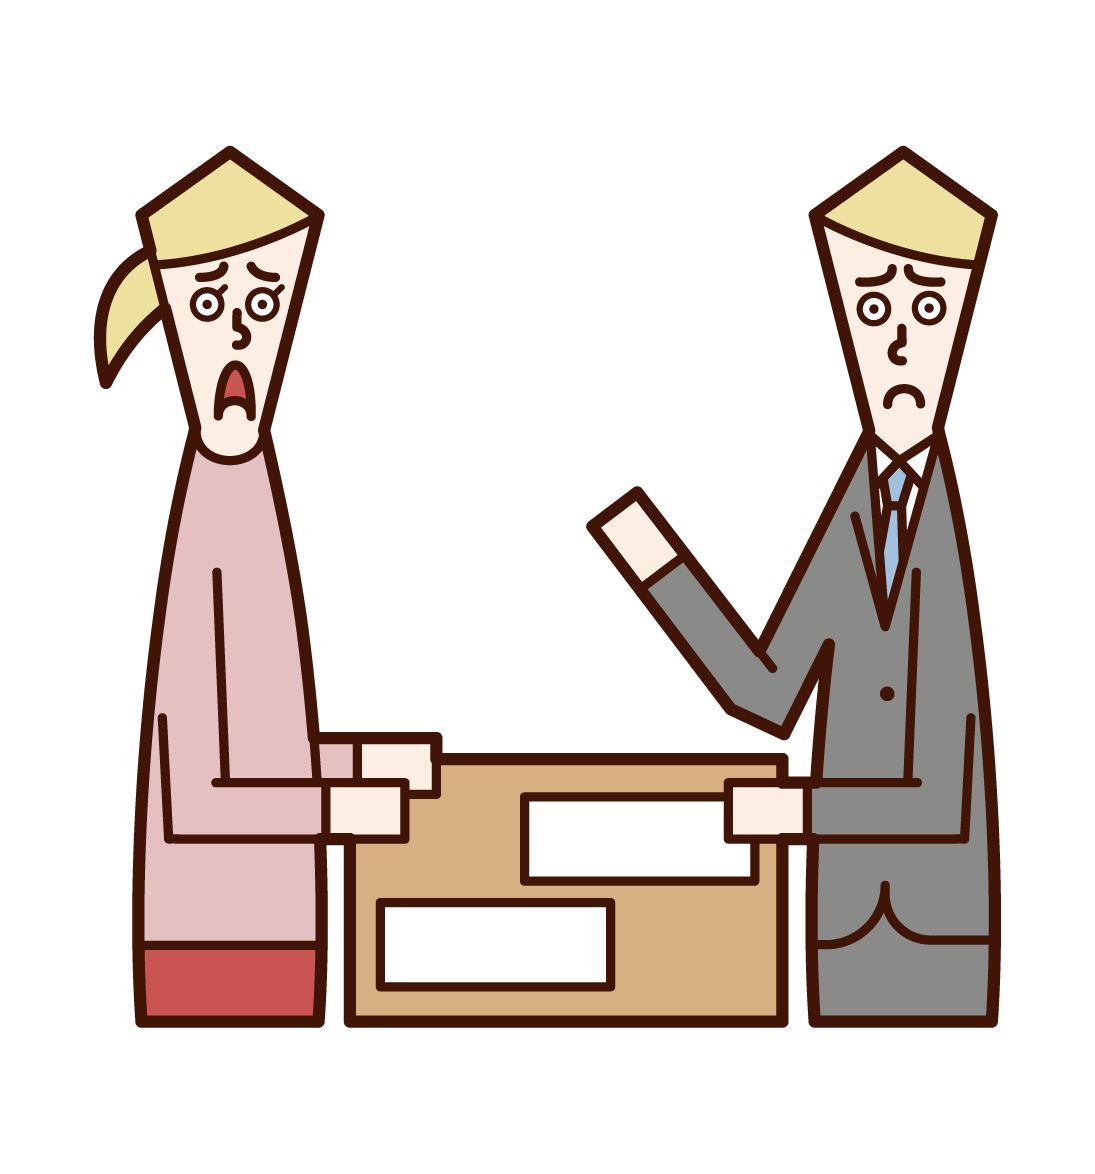 Illustration of a person (male) who consults, consults troubles, and counsels troubles